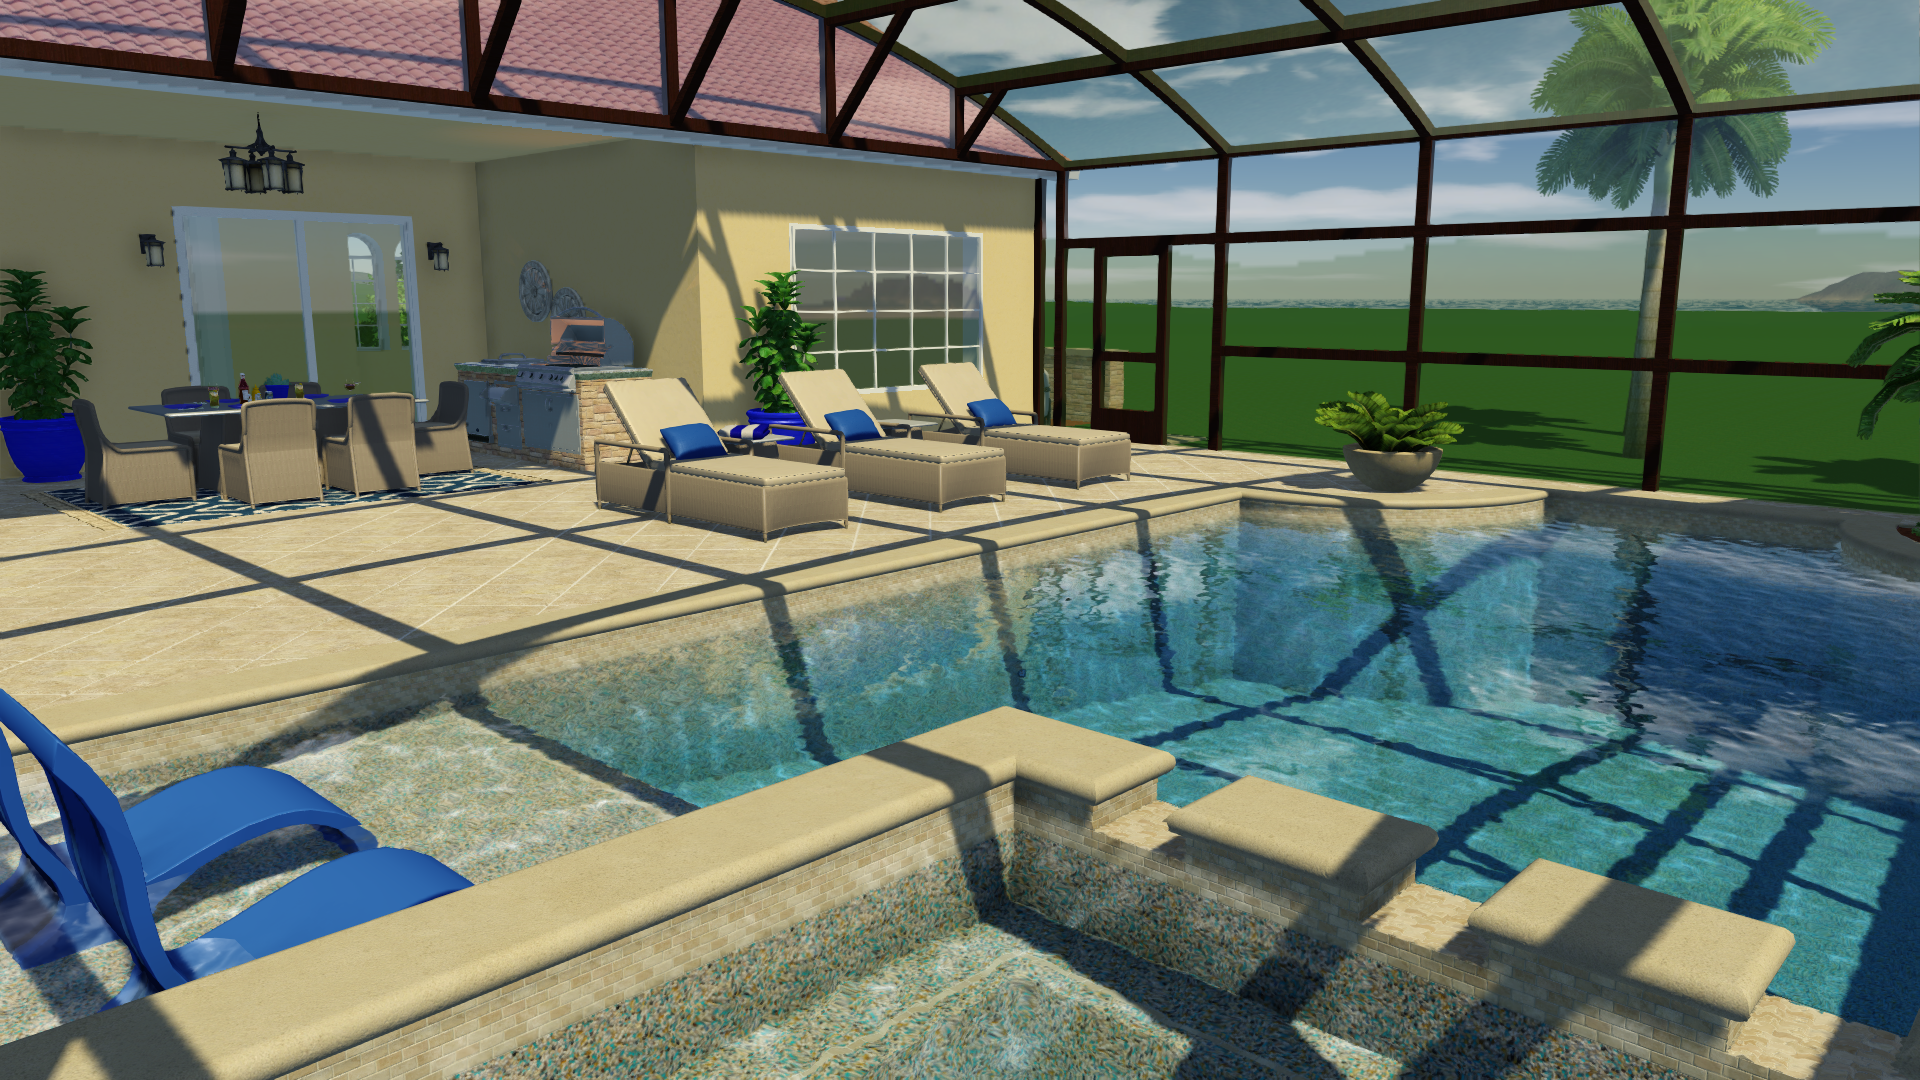 In-Ground Swimming Pool Design and Site Plan